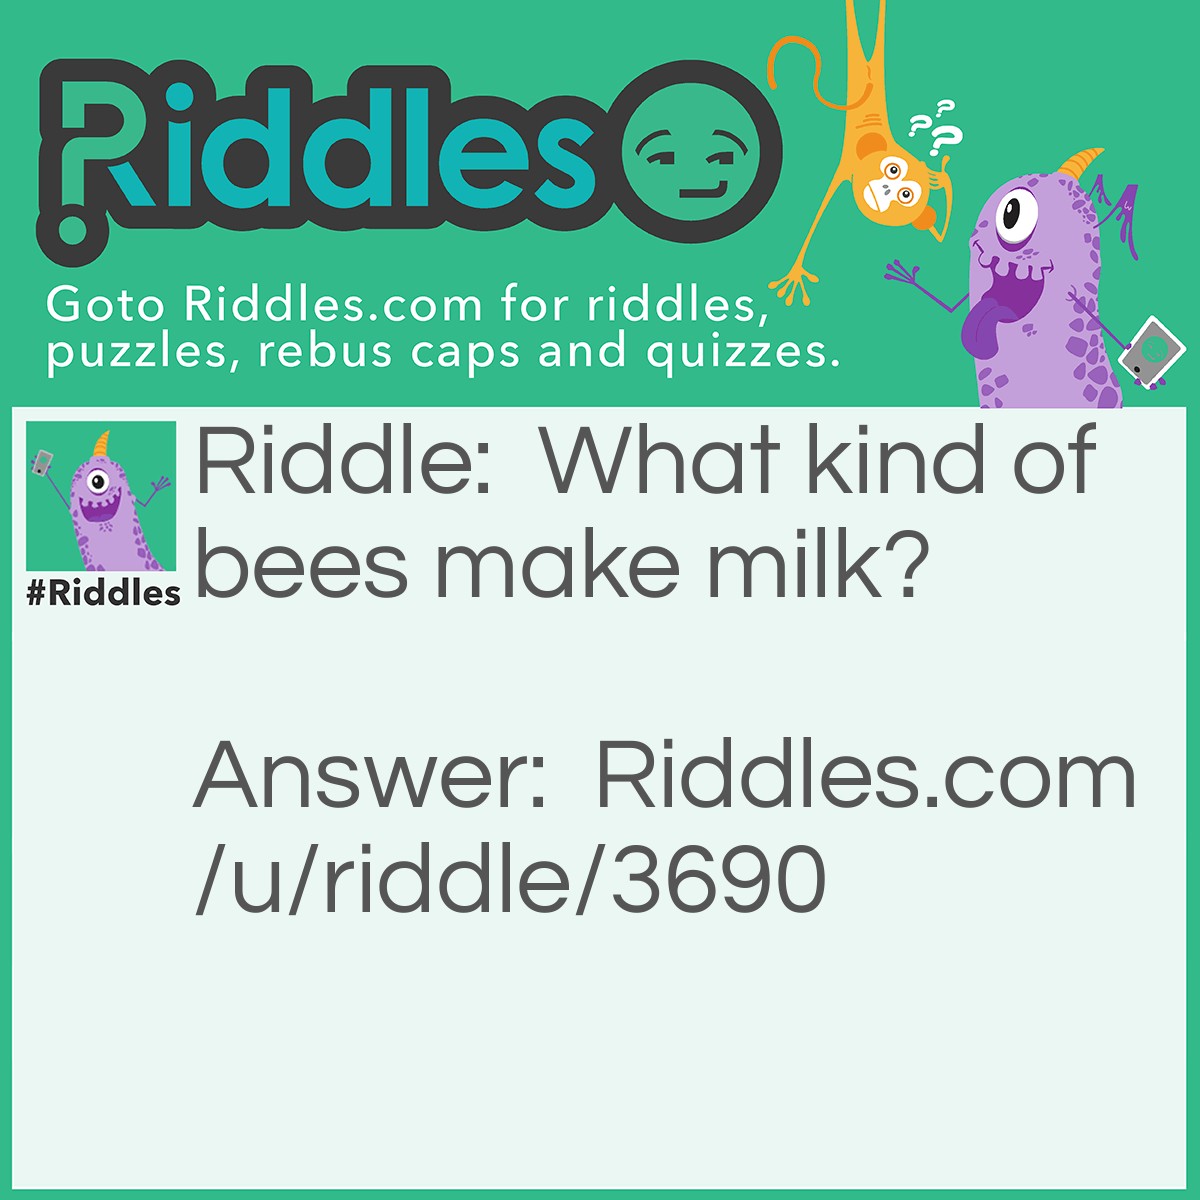 Riddle: What kind of bees make milk? Answer: Boo-bees.